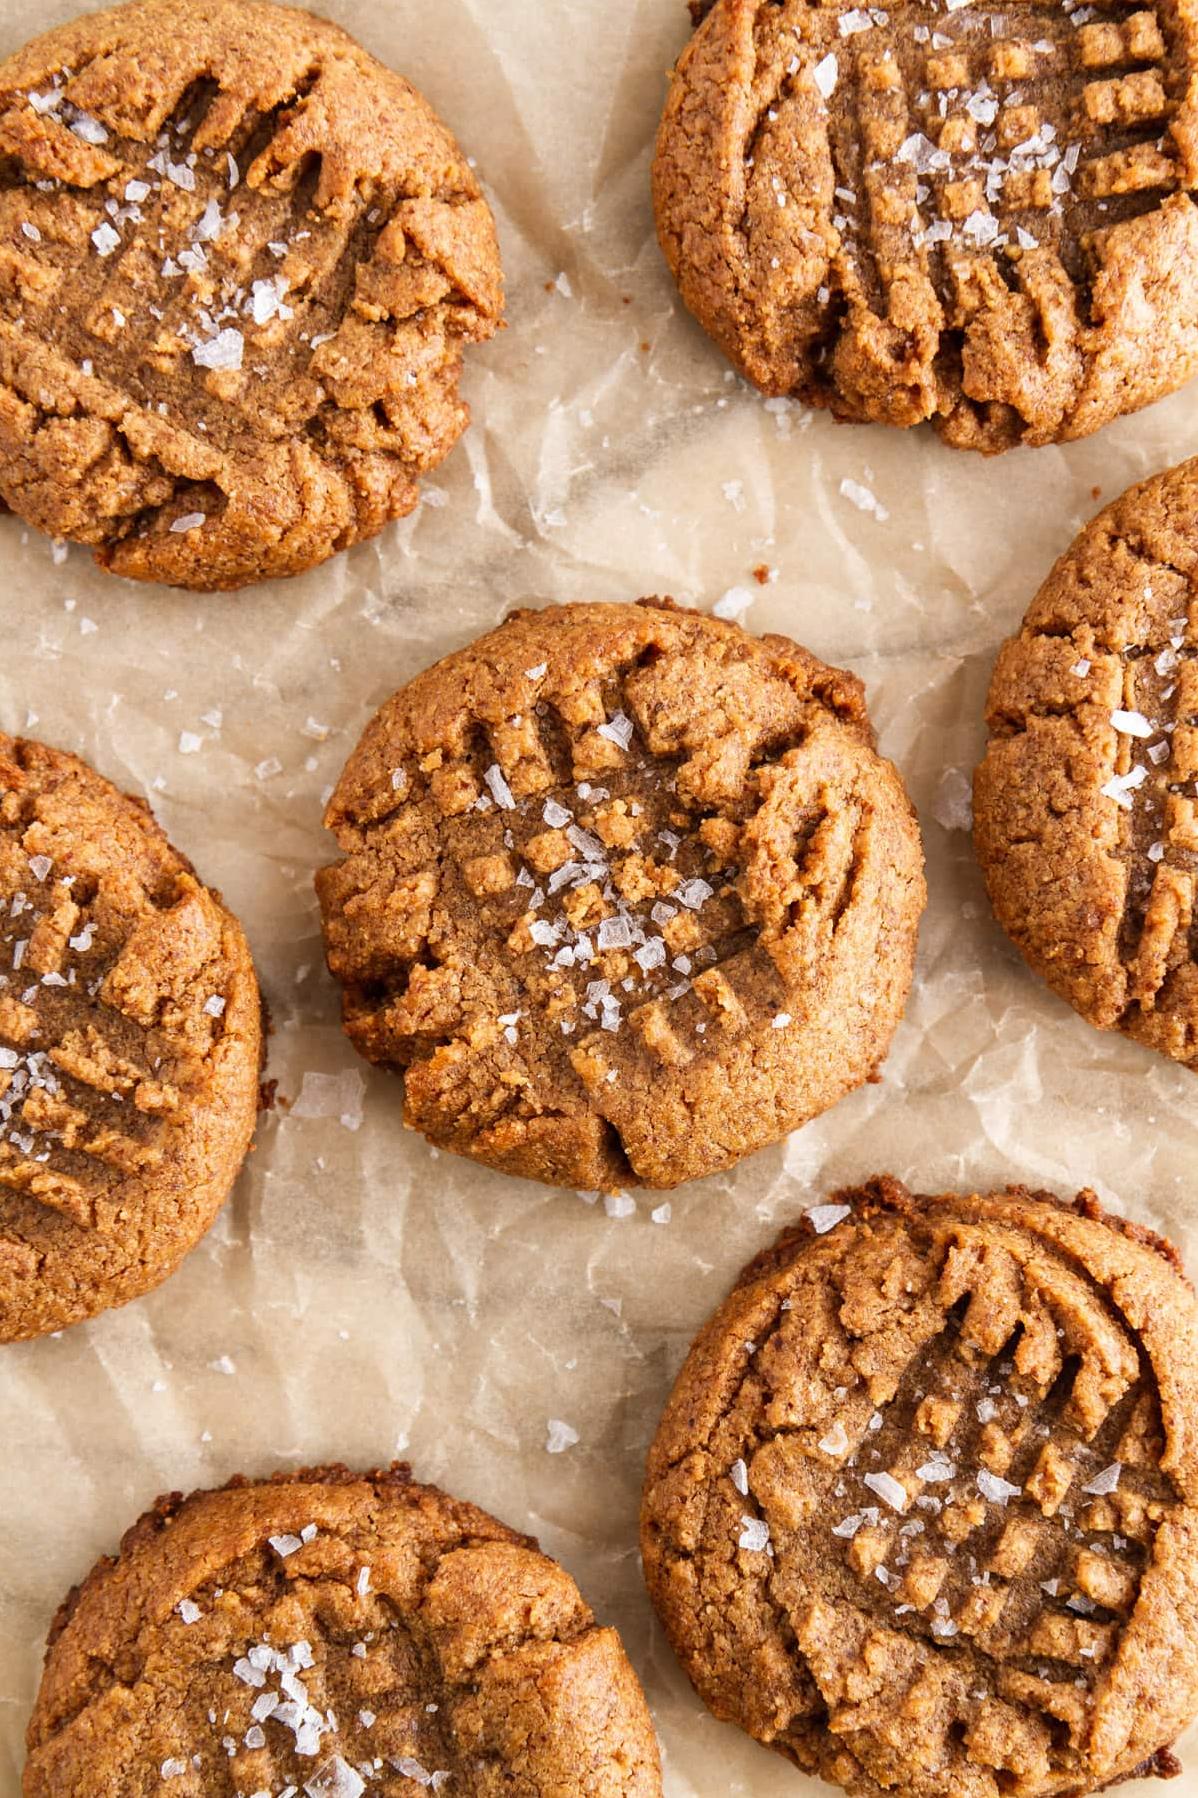  Who says gluten-free treats can't be indulgent?